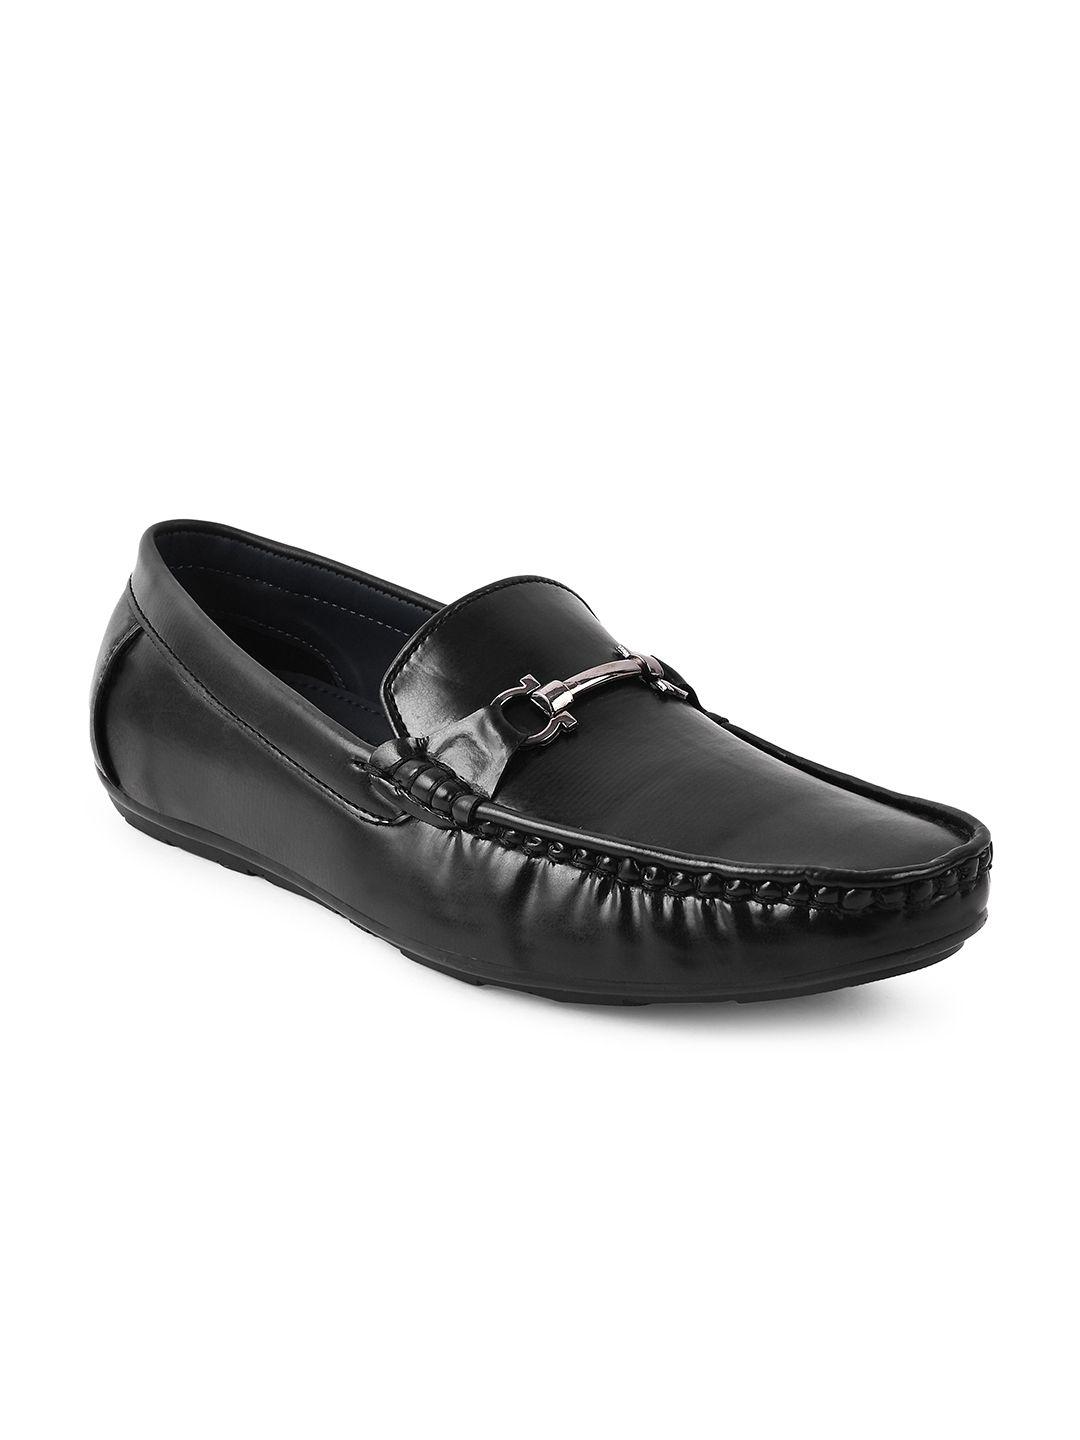 paragon-men-metal-accents-round-toe-formal-loafers